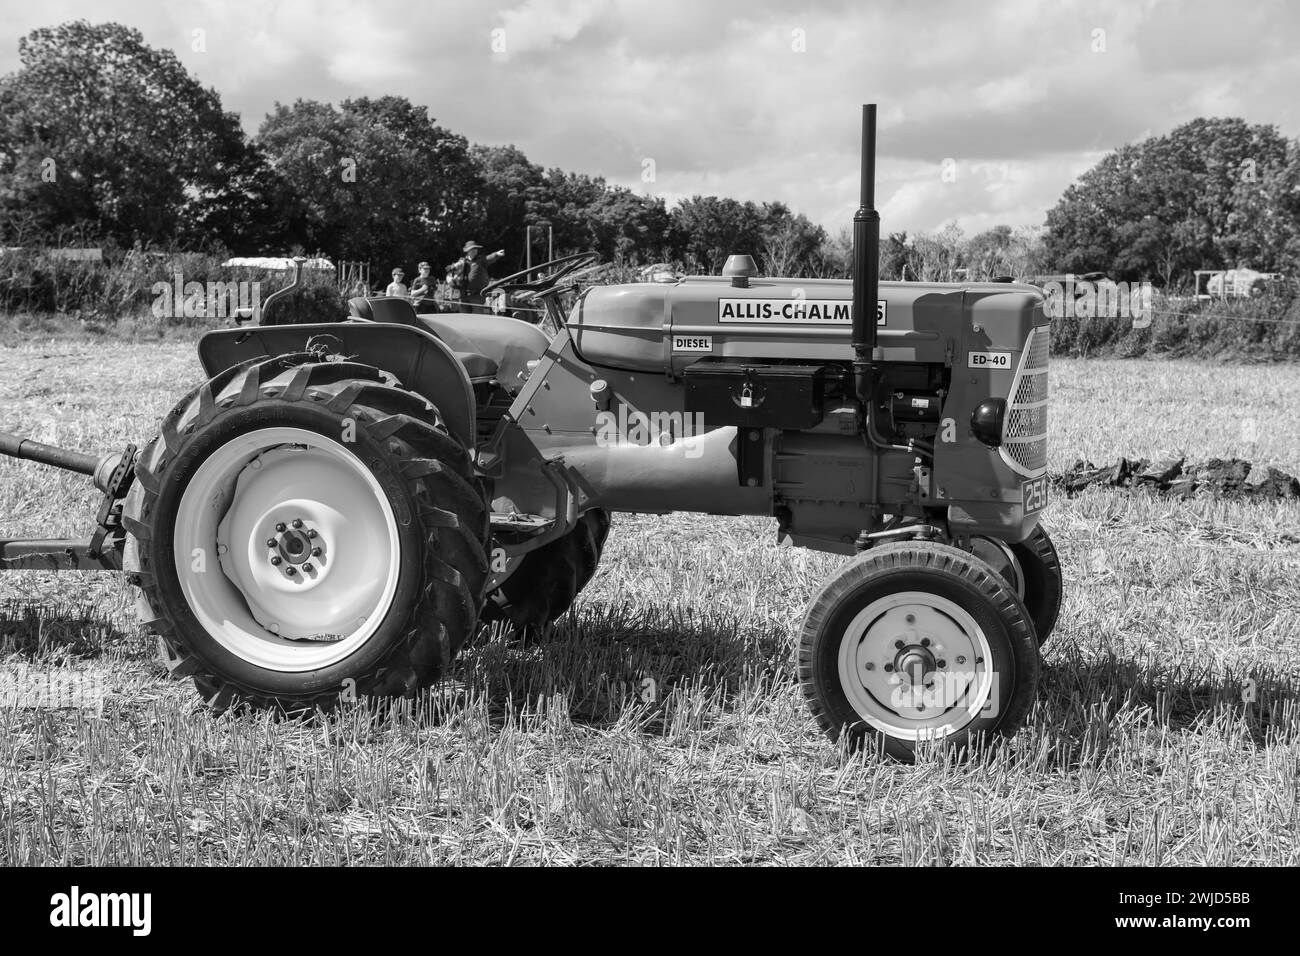 Drayton.Somerset.United kingdom.August 19th 2023.A restored Allis Chalmers ED-40 is on show at a Yesterdays Farming event Stock Photo